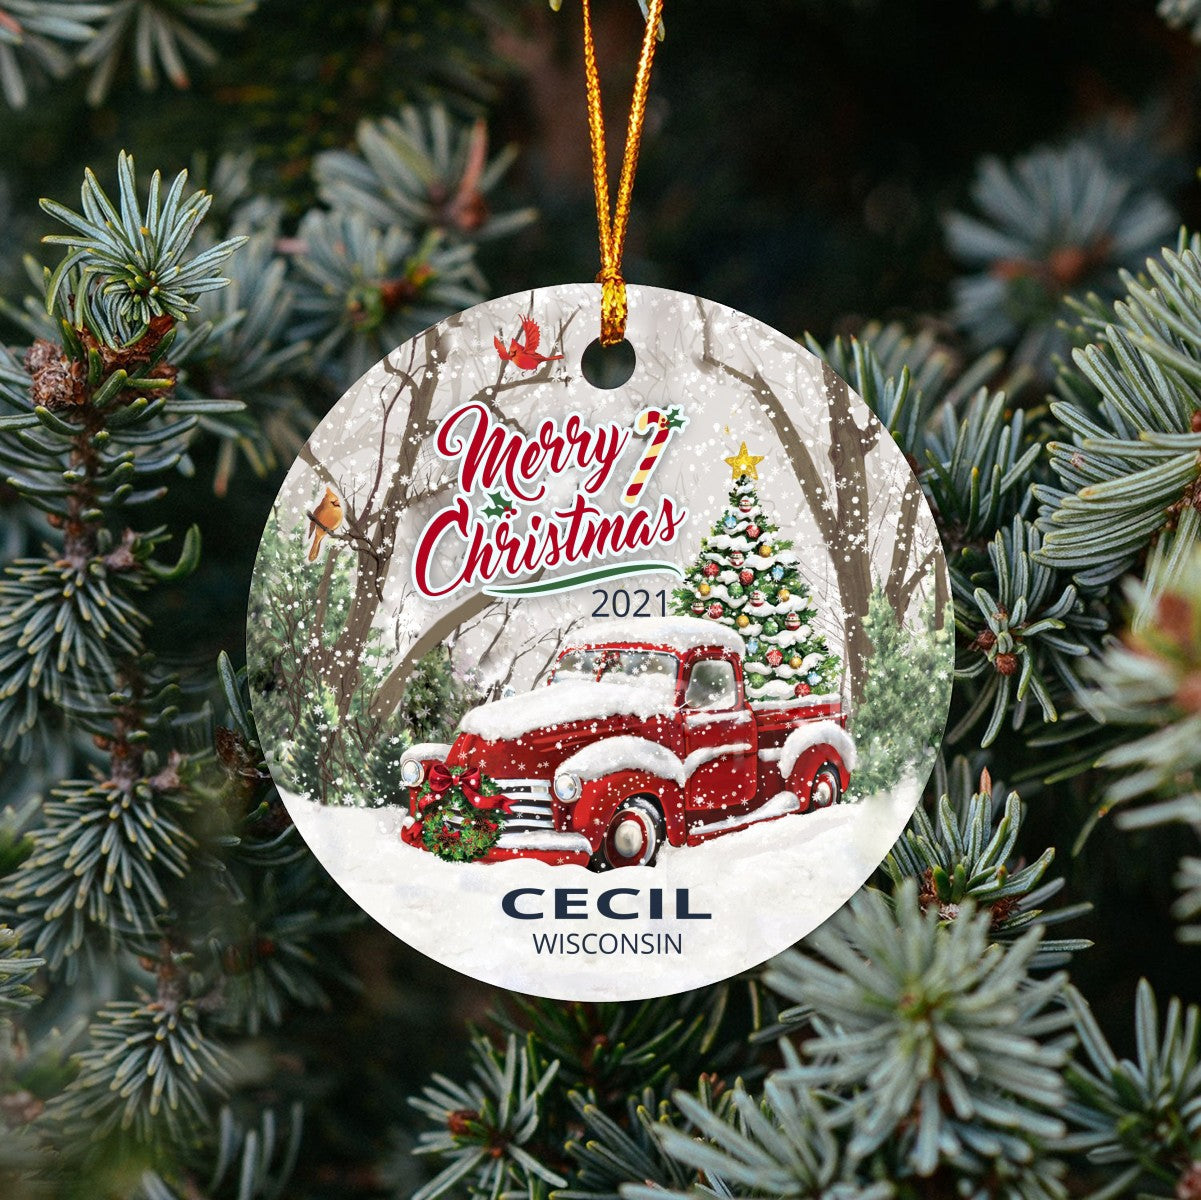 Christmas Tree Ornaments Cecil - Ornament With Name City, State Cecil Wisconsin WI Ornament - Red Truck Xmas Ornaments 3'' Plastic Gift For Family, Friend And Housewarming